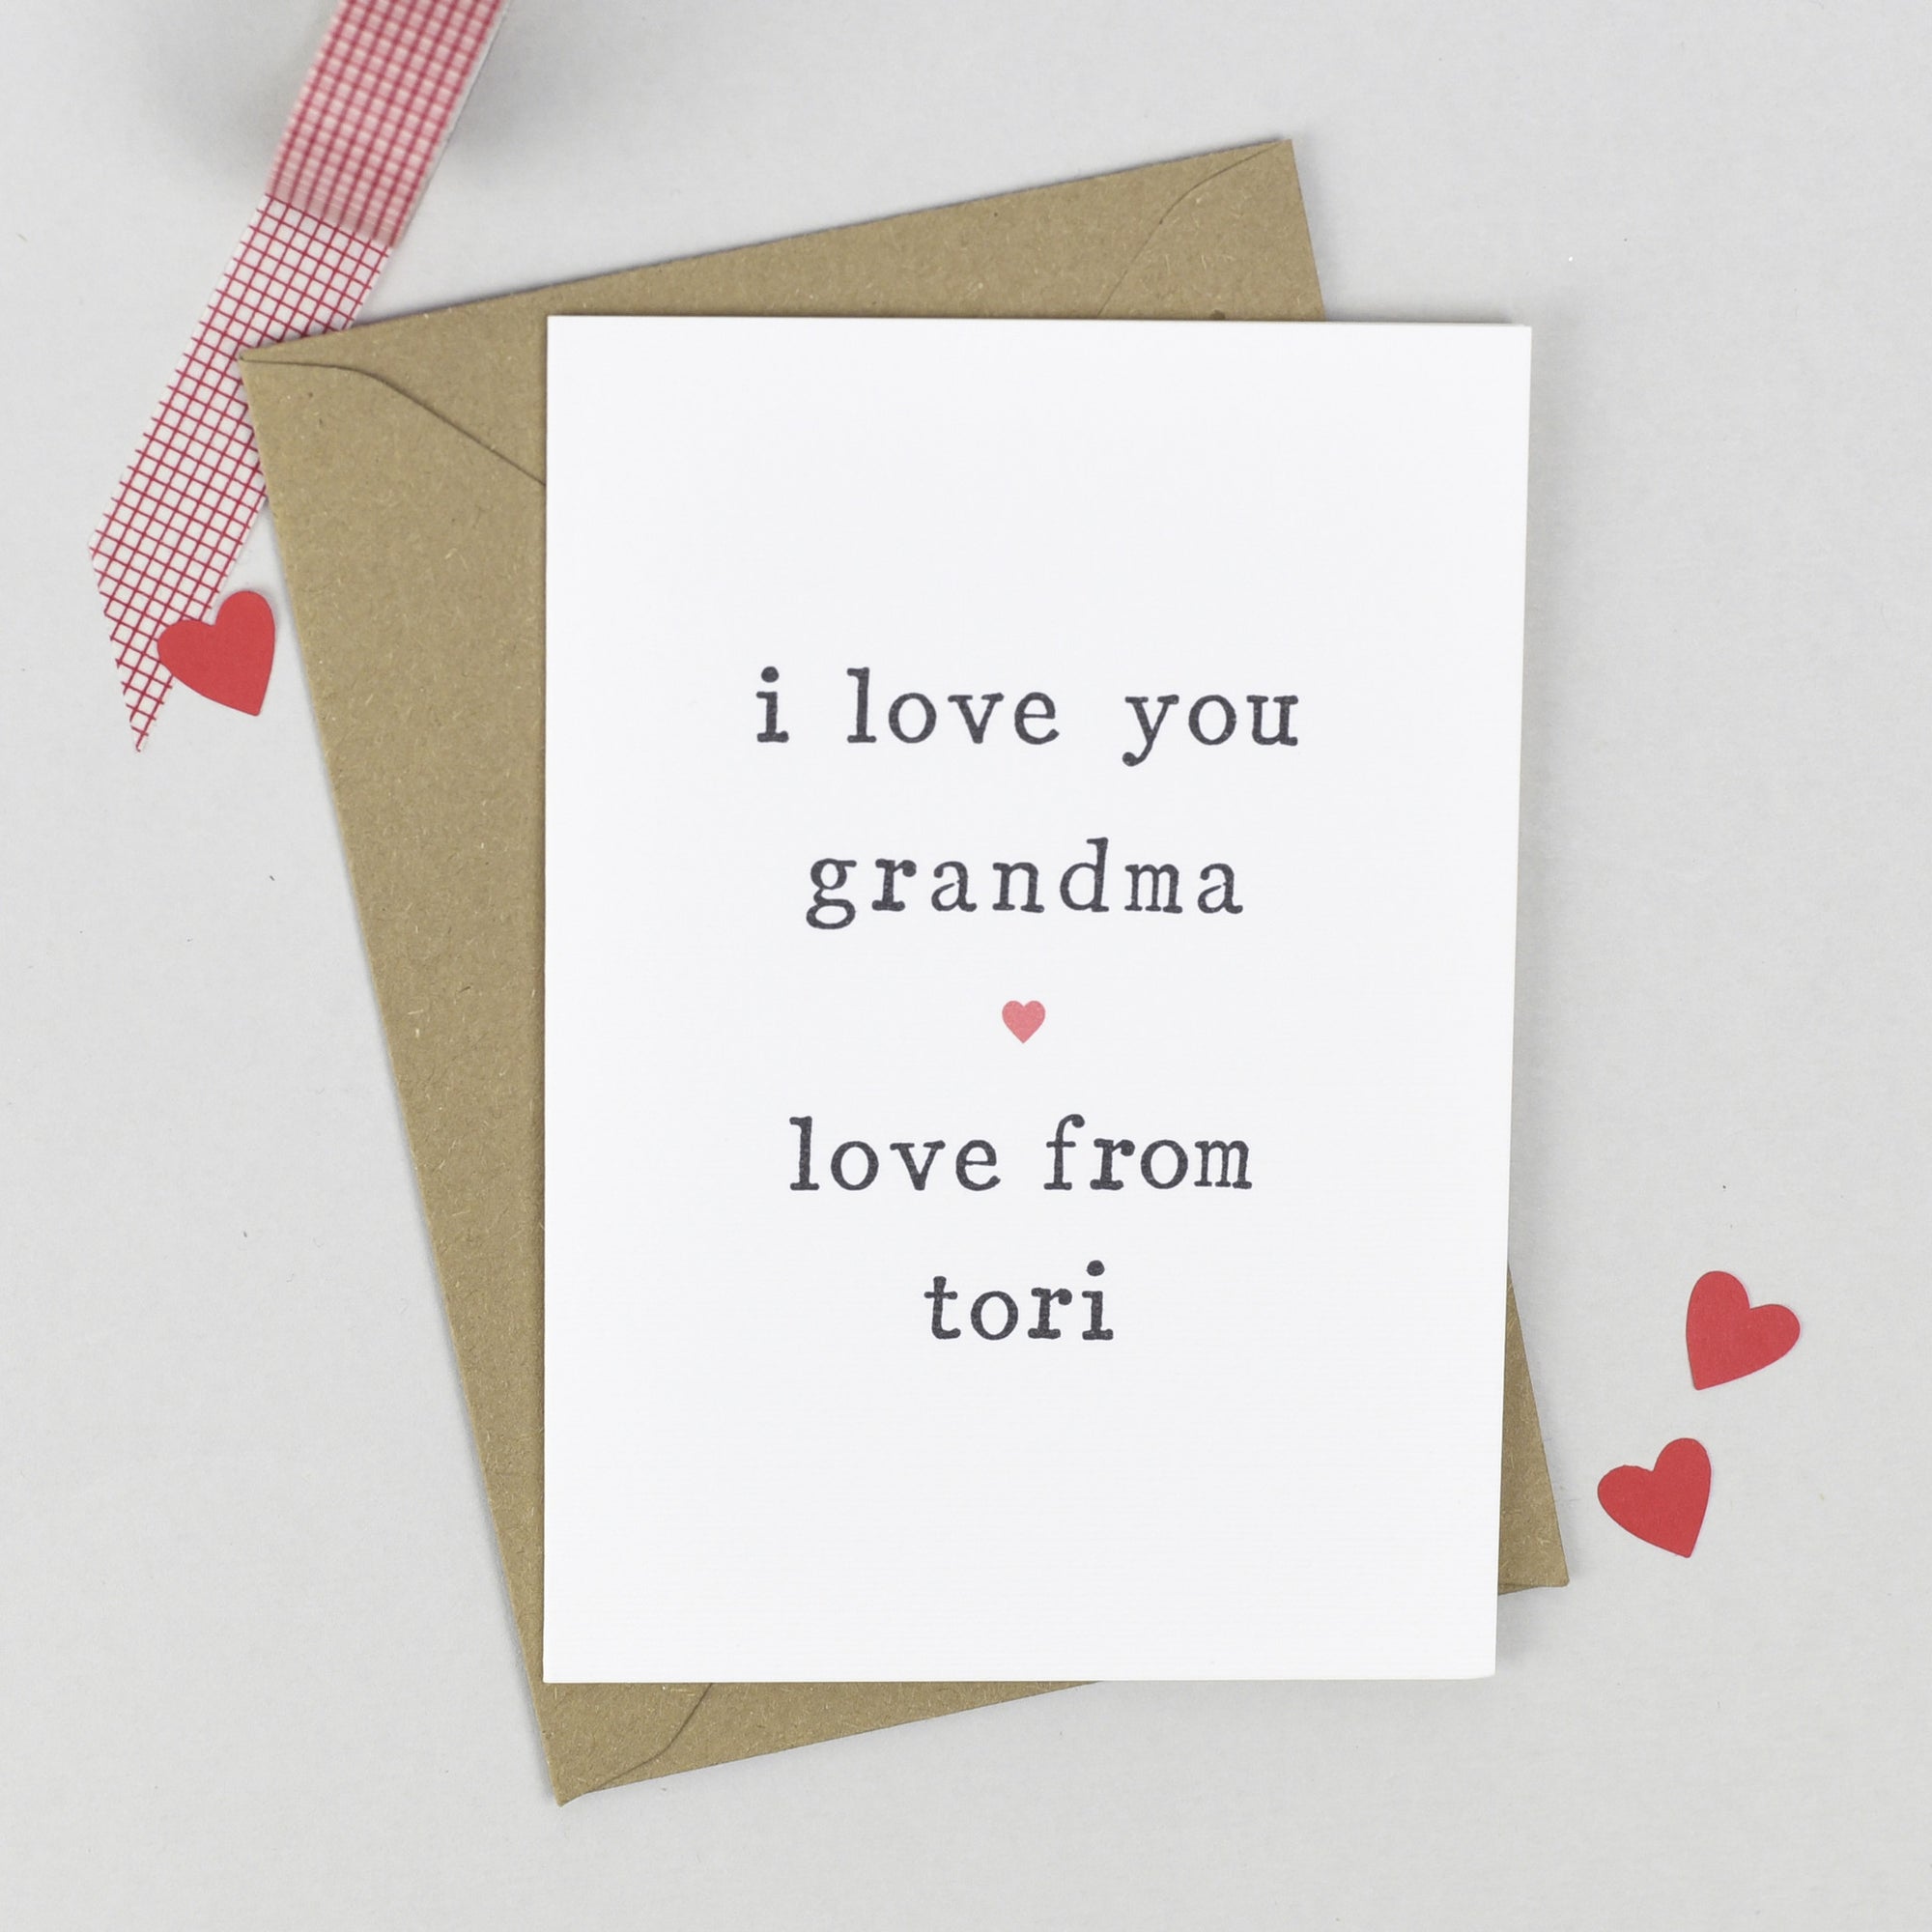 Personalised 'Love You' Mother's Day or Birthday Card